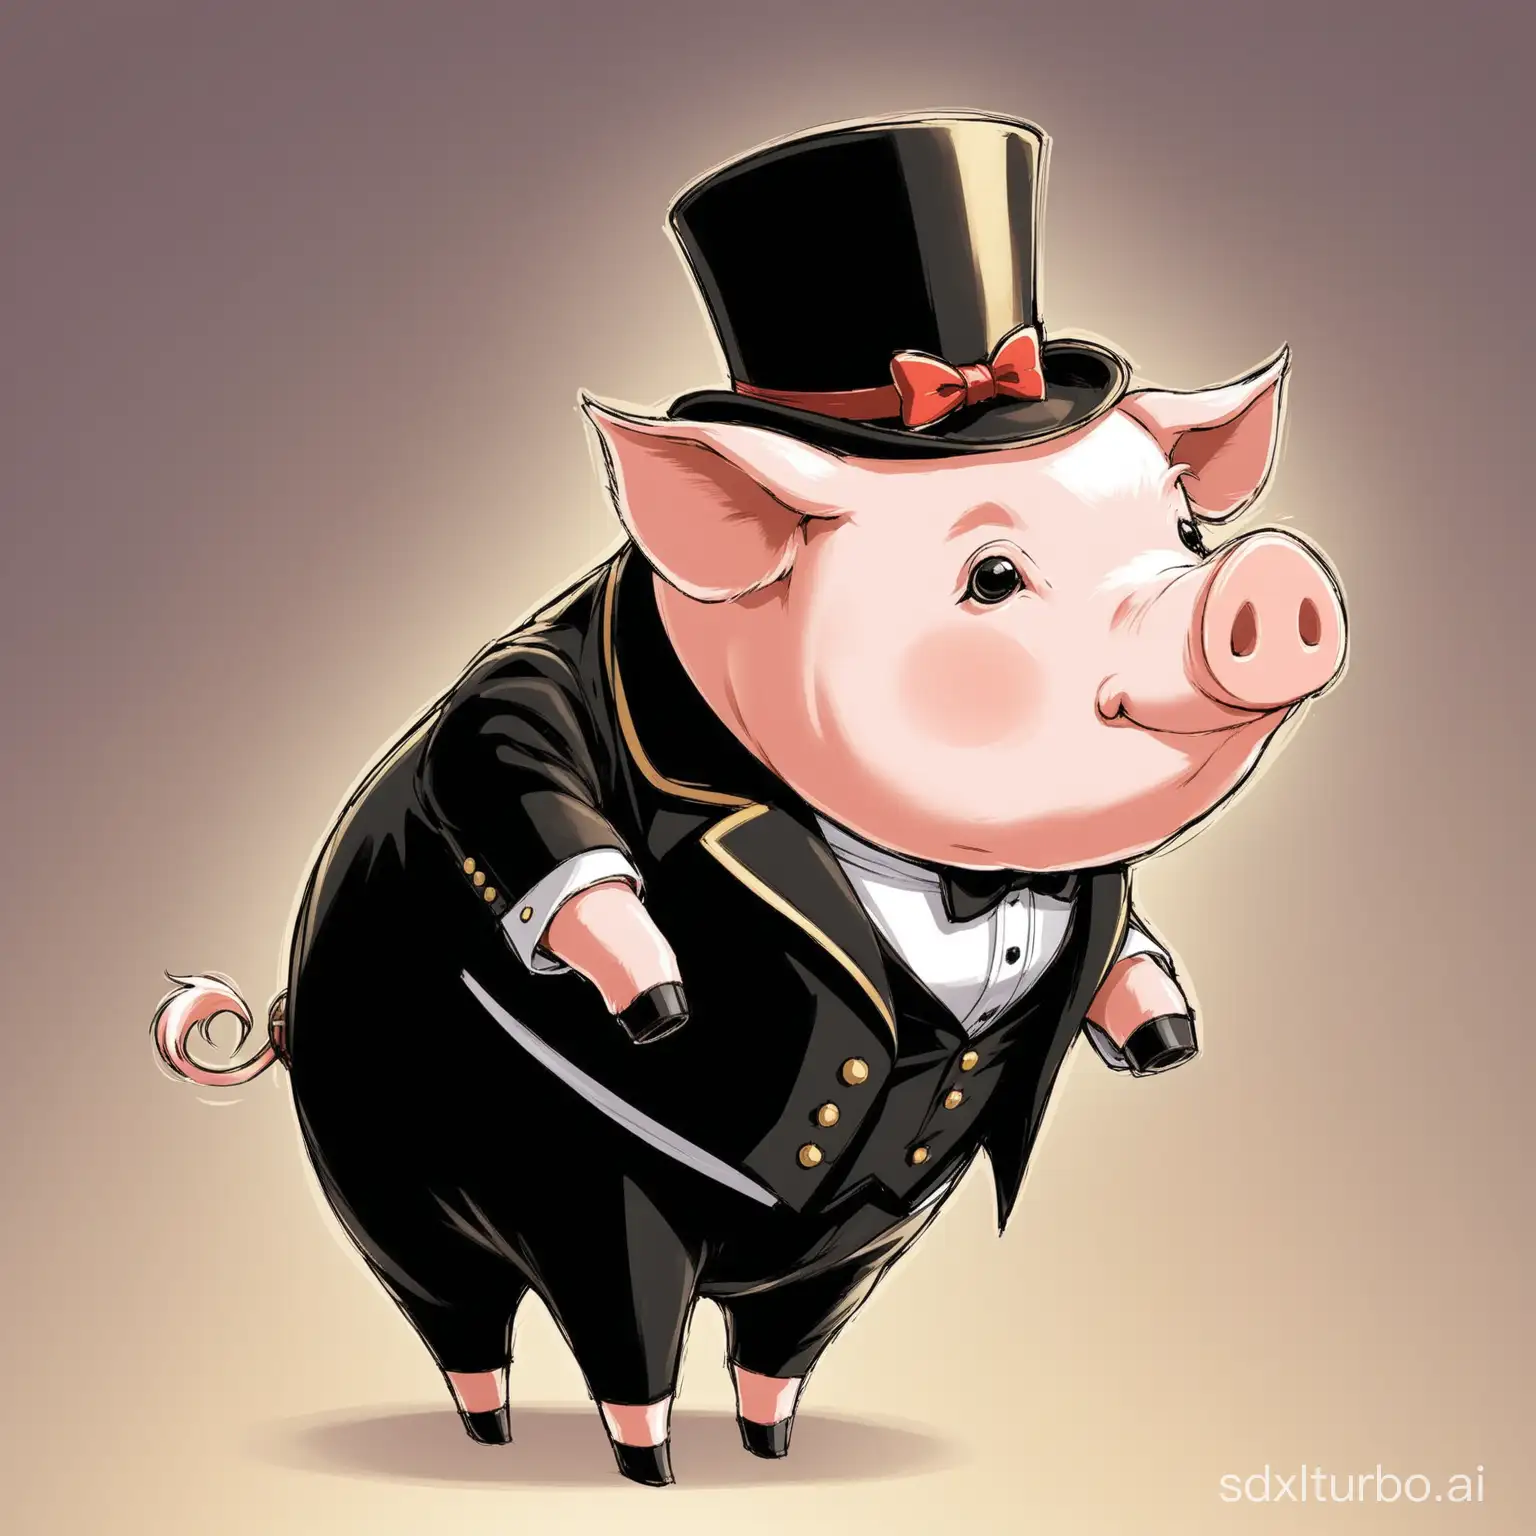 A pig in a tailcoat.